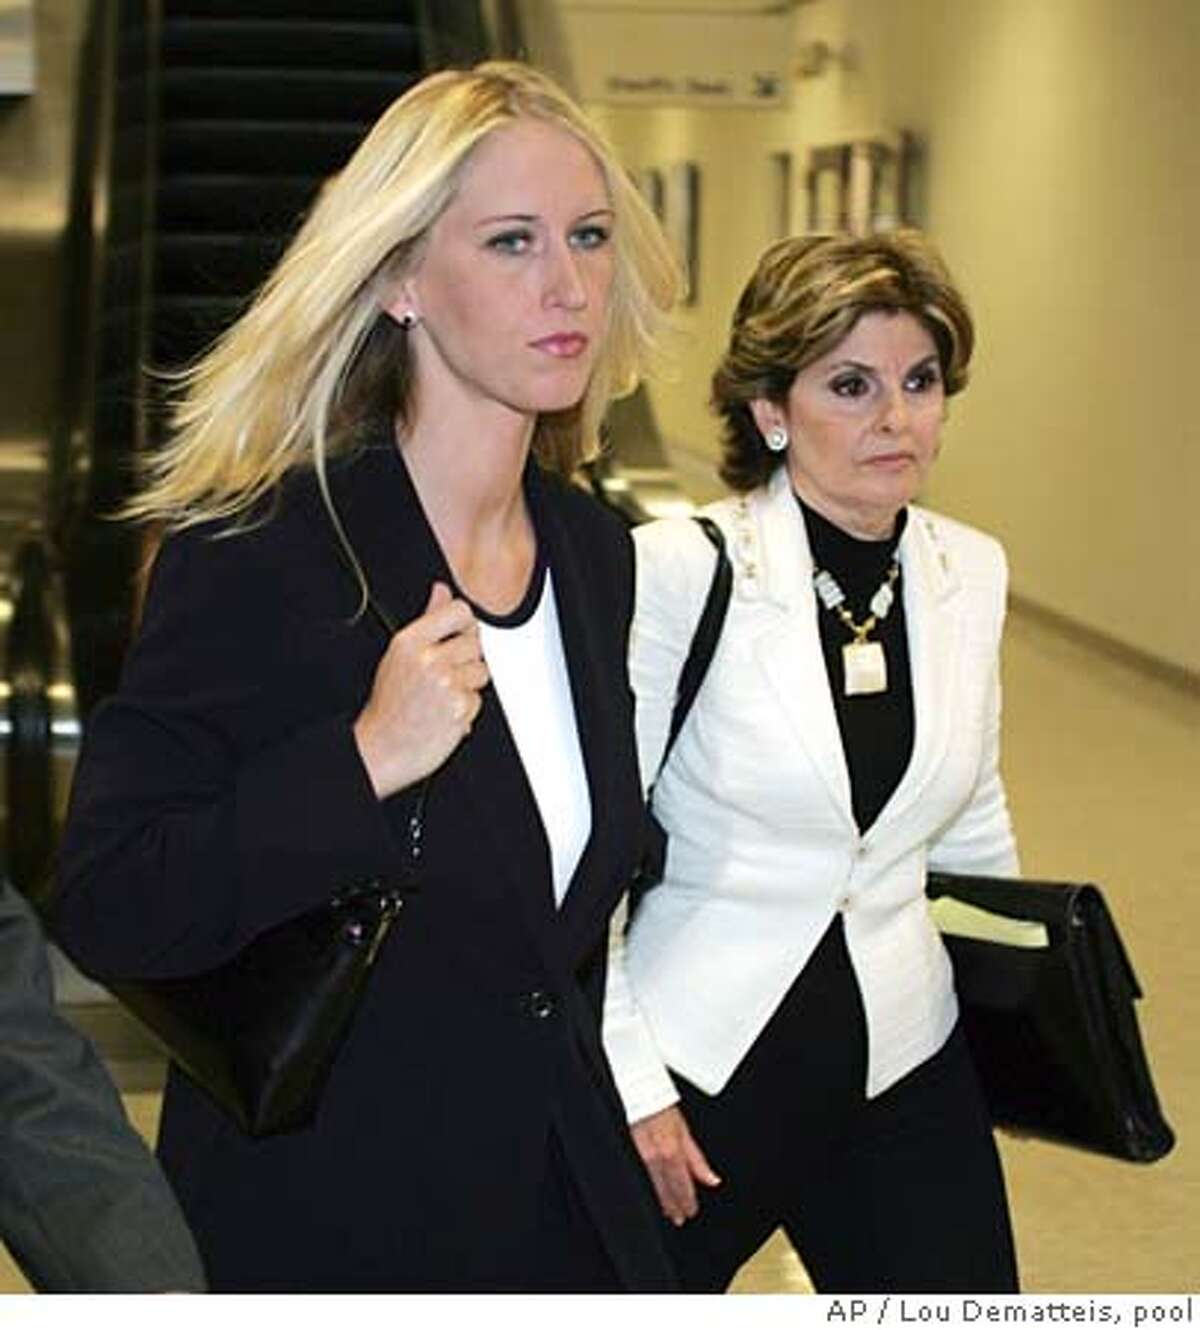 With her attorney Gloria Allred at right, Amber Frey leaves the courthouse after her second day of testimony during the Scott Peterson double murder trial in Redwood City, California, Aug. 11, 2004. (AP Photo/Lou Dematteis, pool) POOL PHOTO